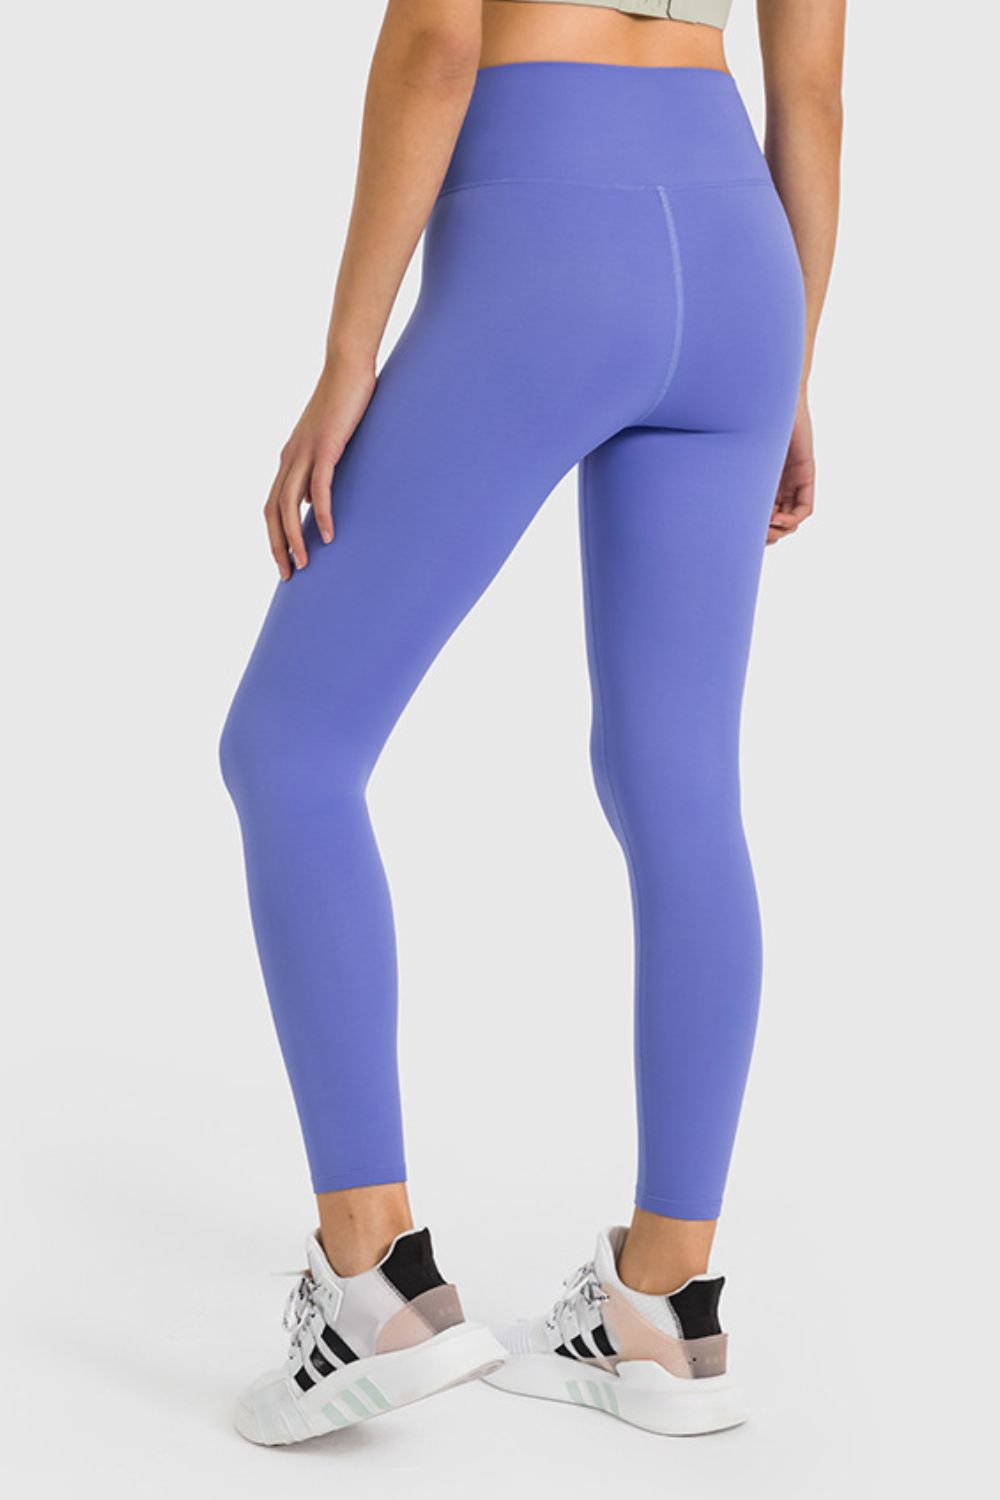 Wide High-Waist Cropped Athletic Yoga Legging Pants